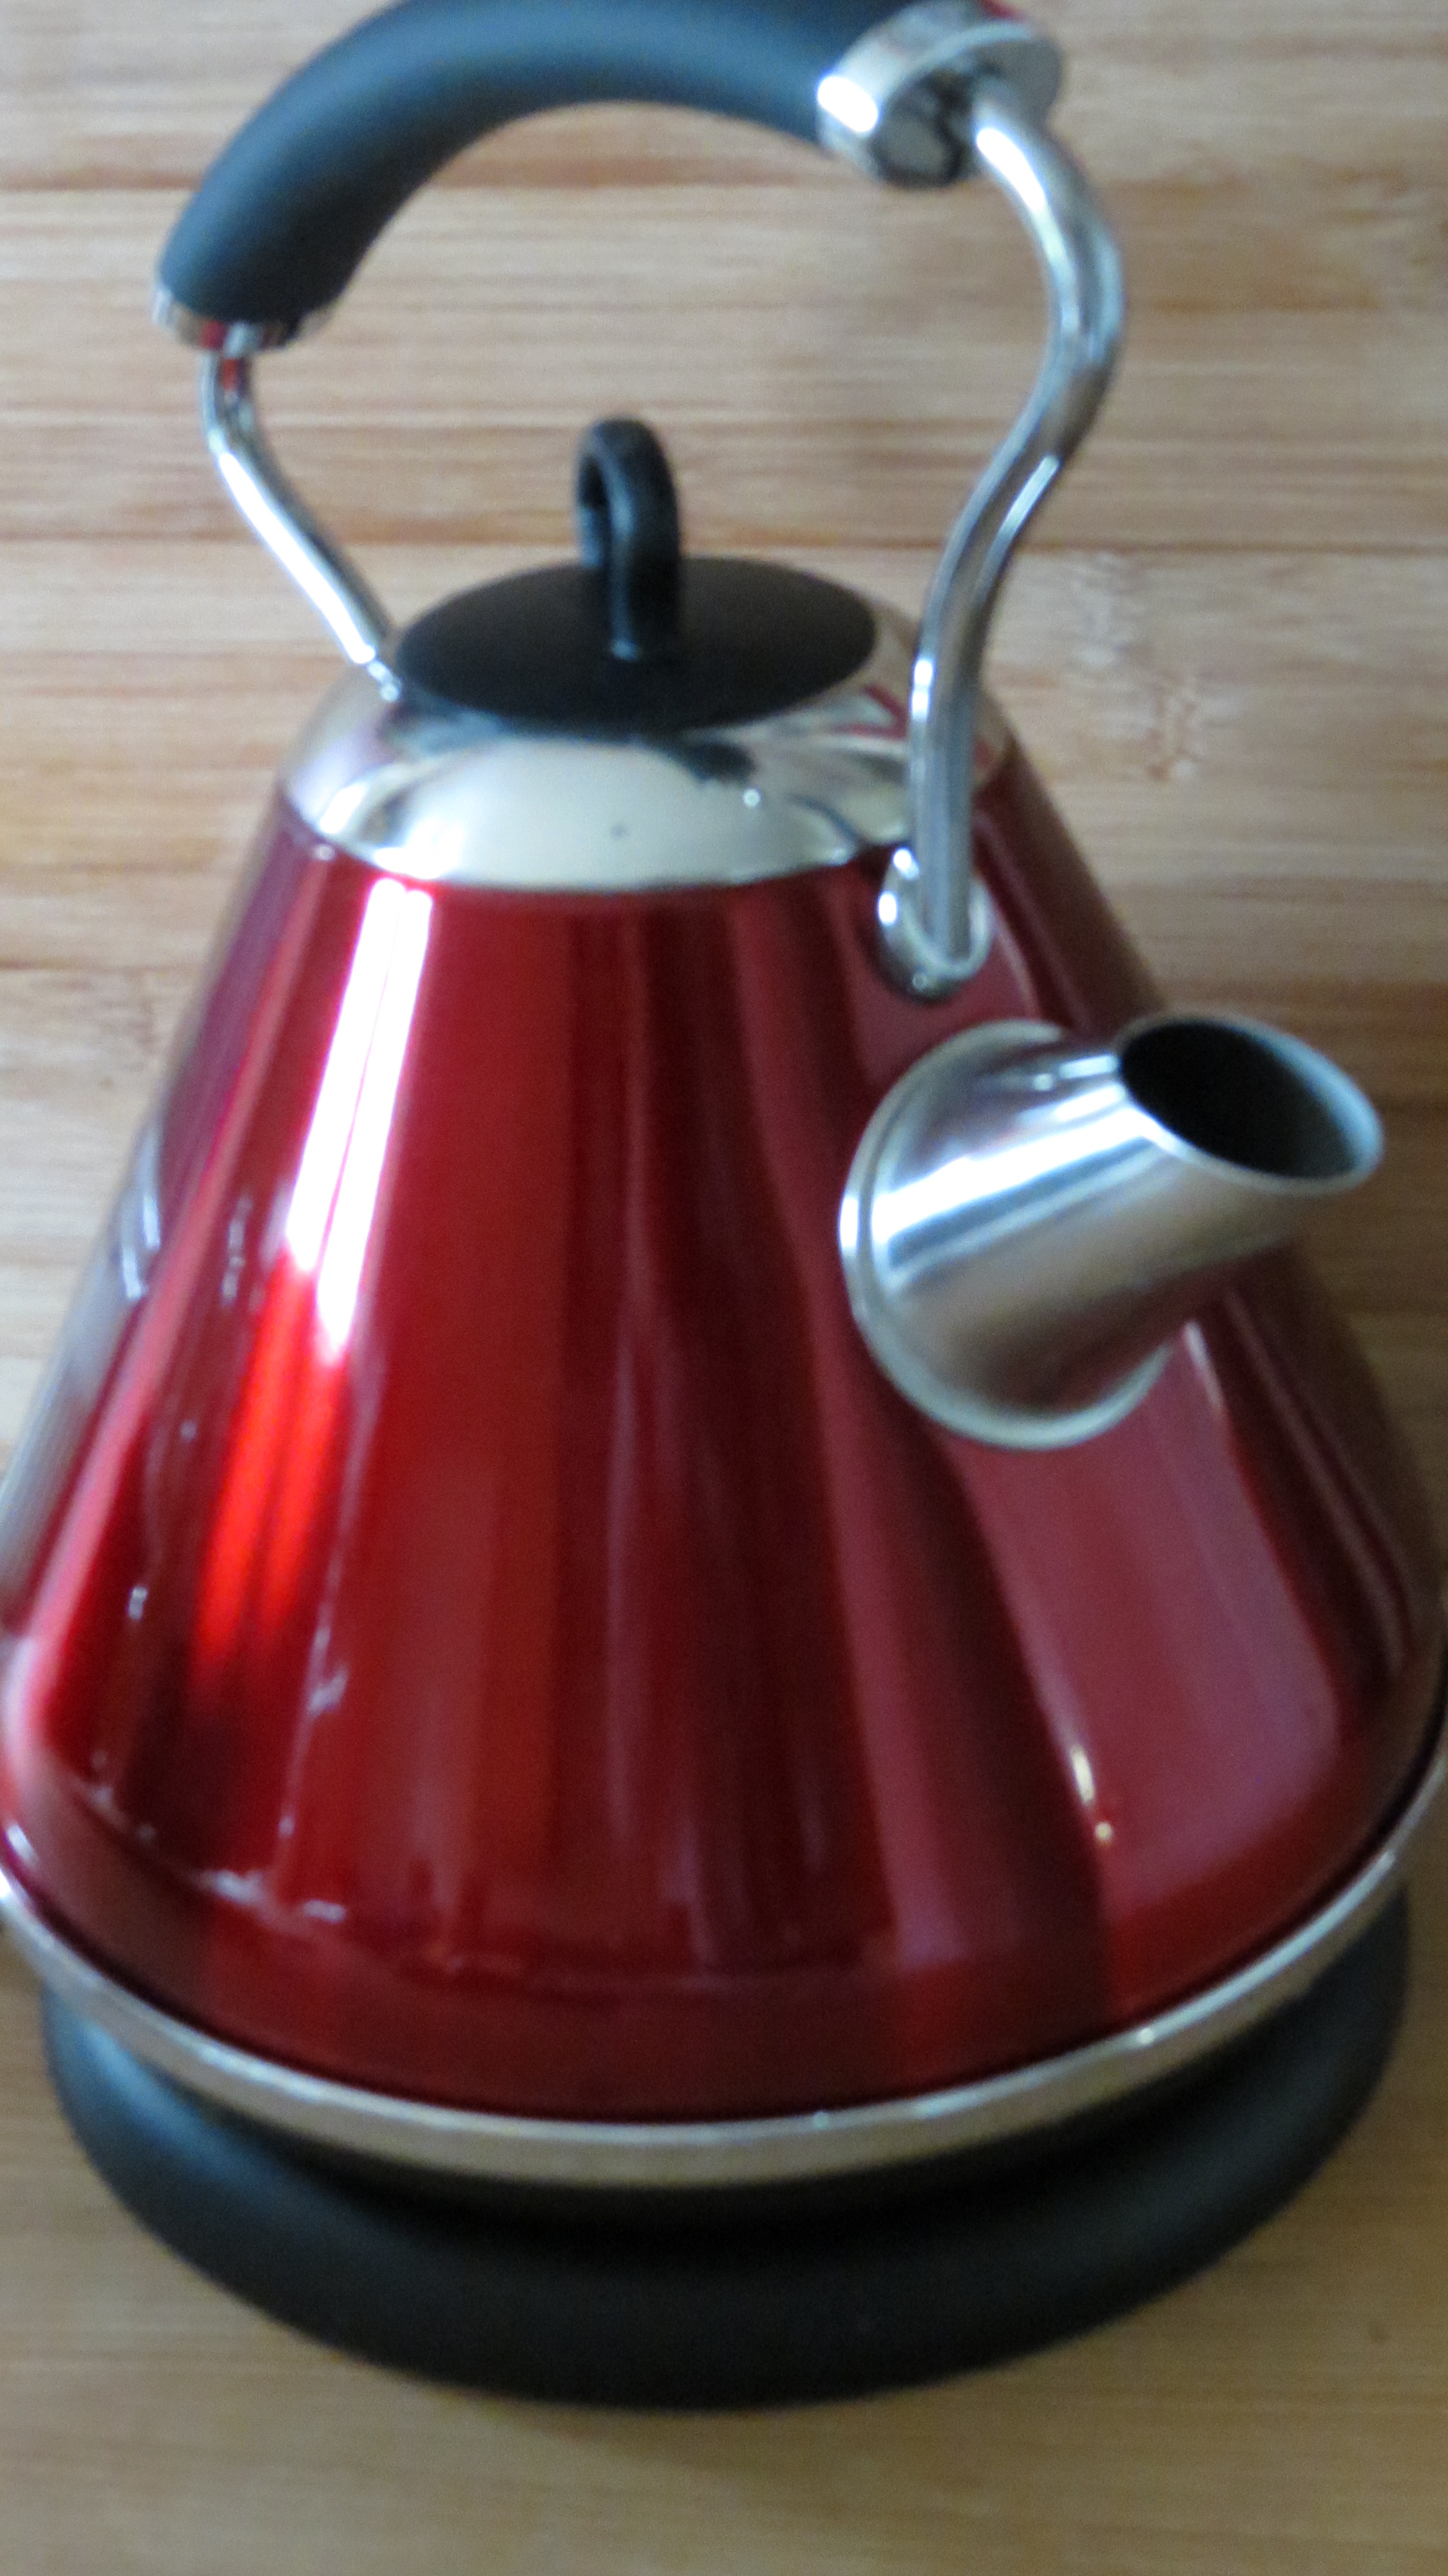 The Townhouse Kettle by SWAN – a product review – TSSREVIEWSDOTCOM